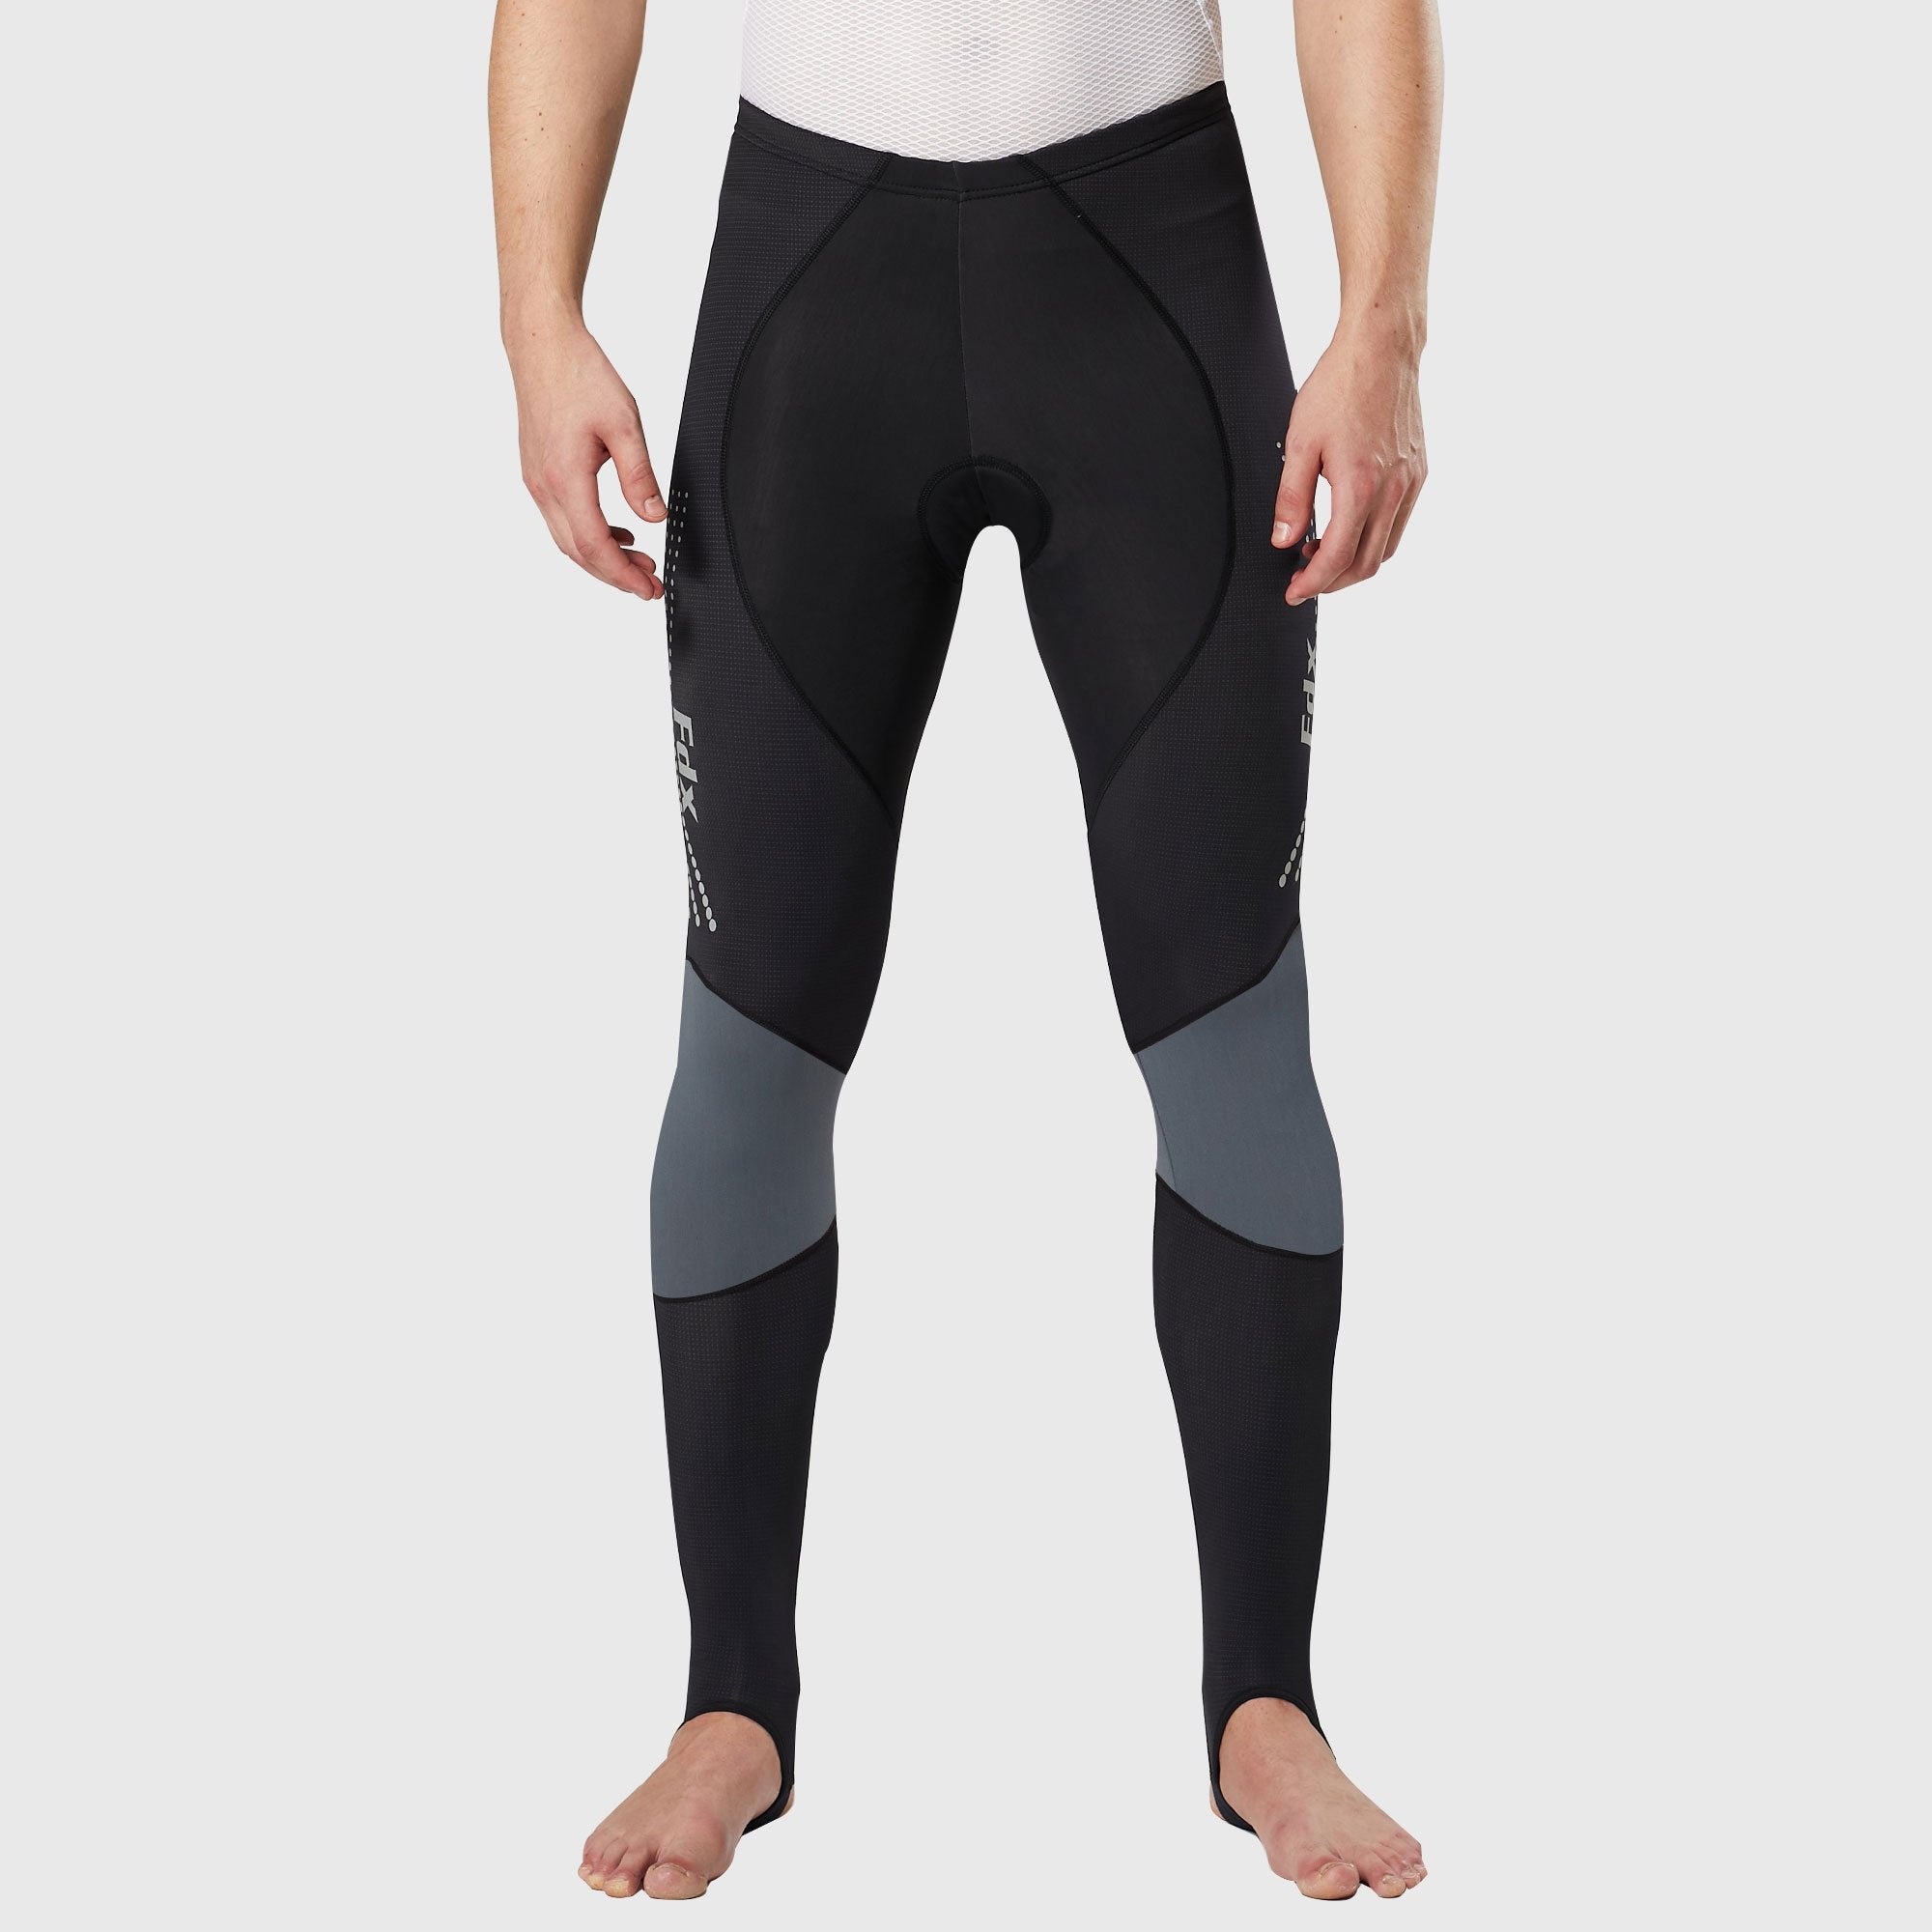 Fdx Thermodream Men's Grey Thermal Padded Cycling Tights